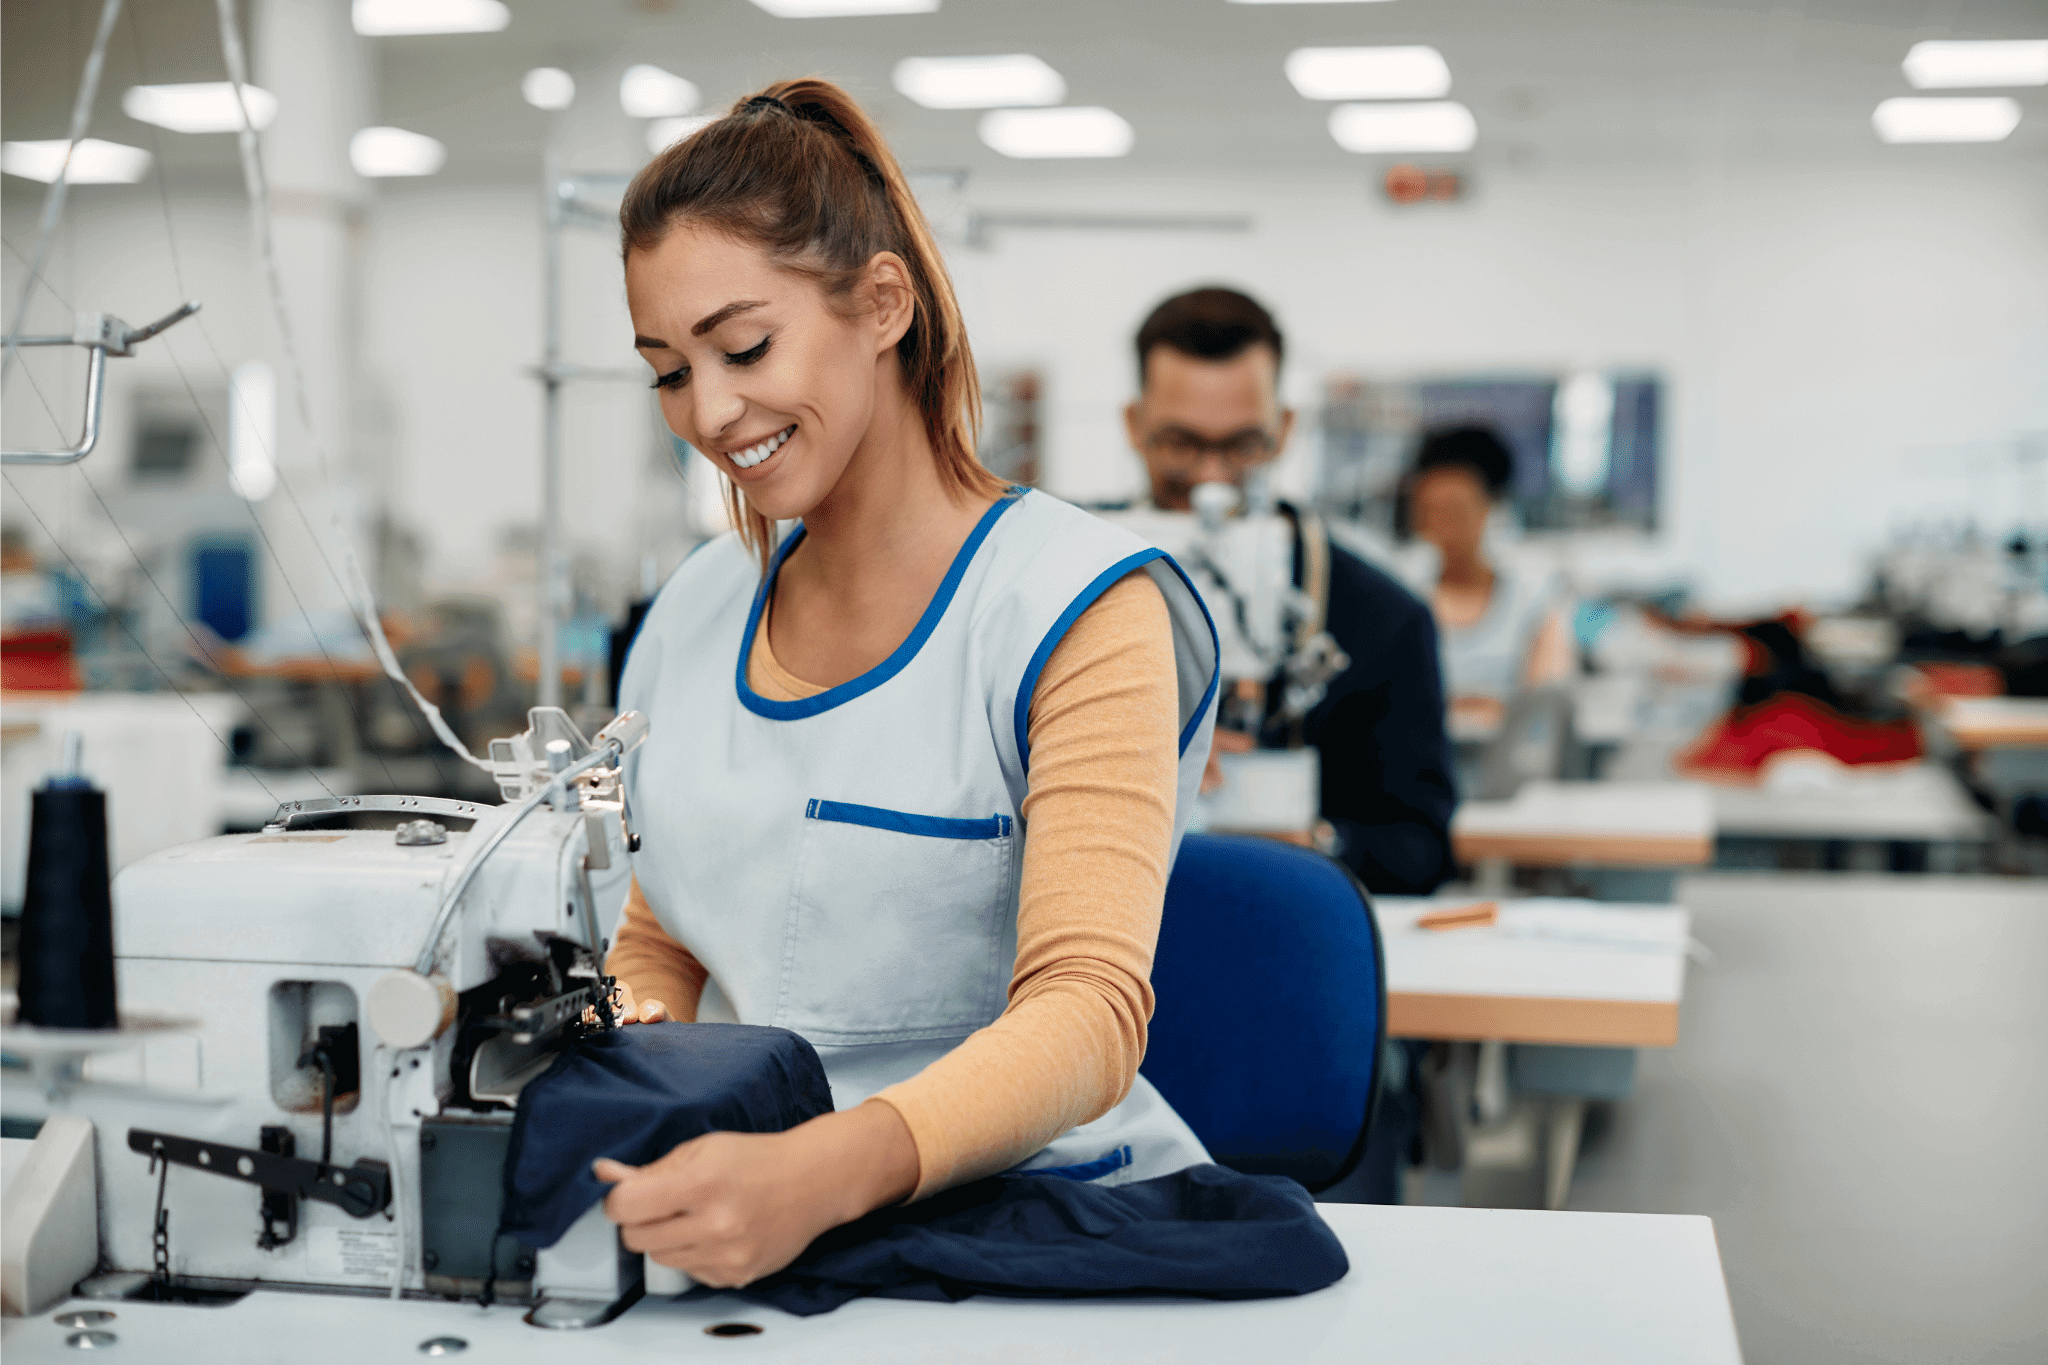 The woman in a blue overall working at the ready-to-wear clothing factory.